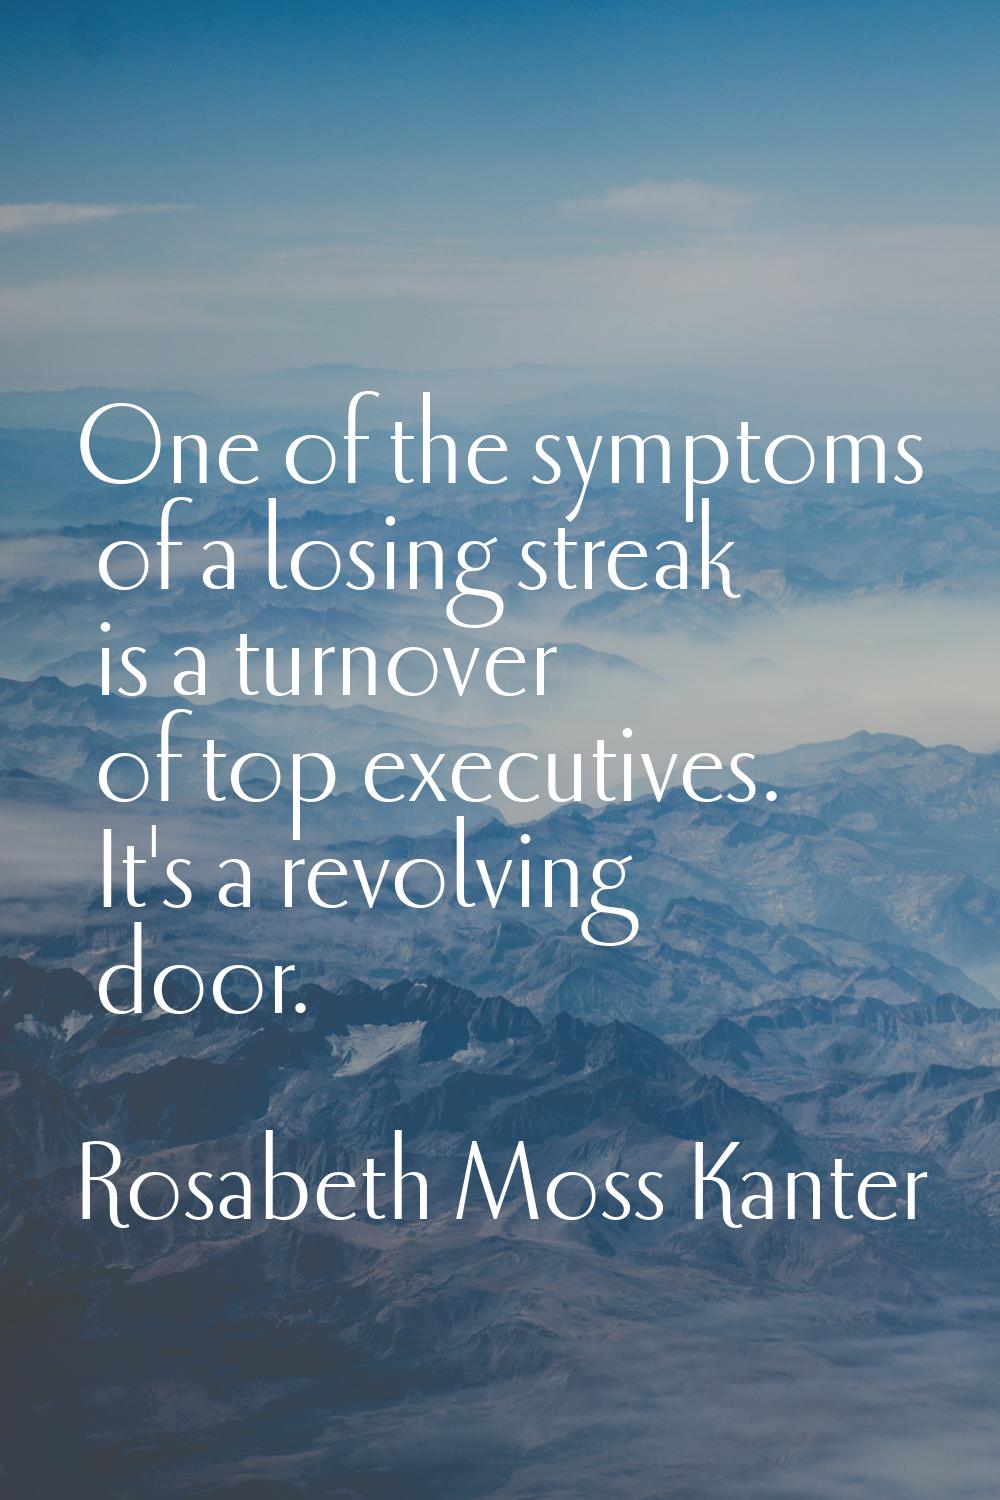 One of the symptoms of a losing streak is a turnover of top executives. It's a revolving door.